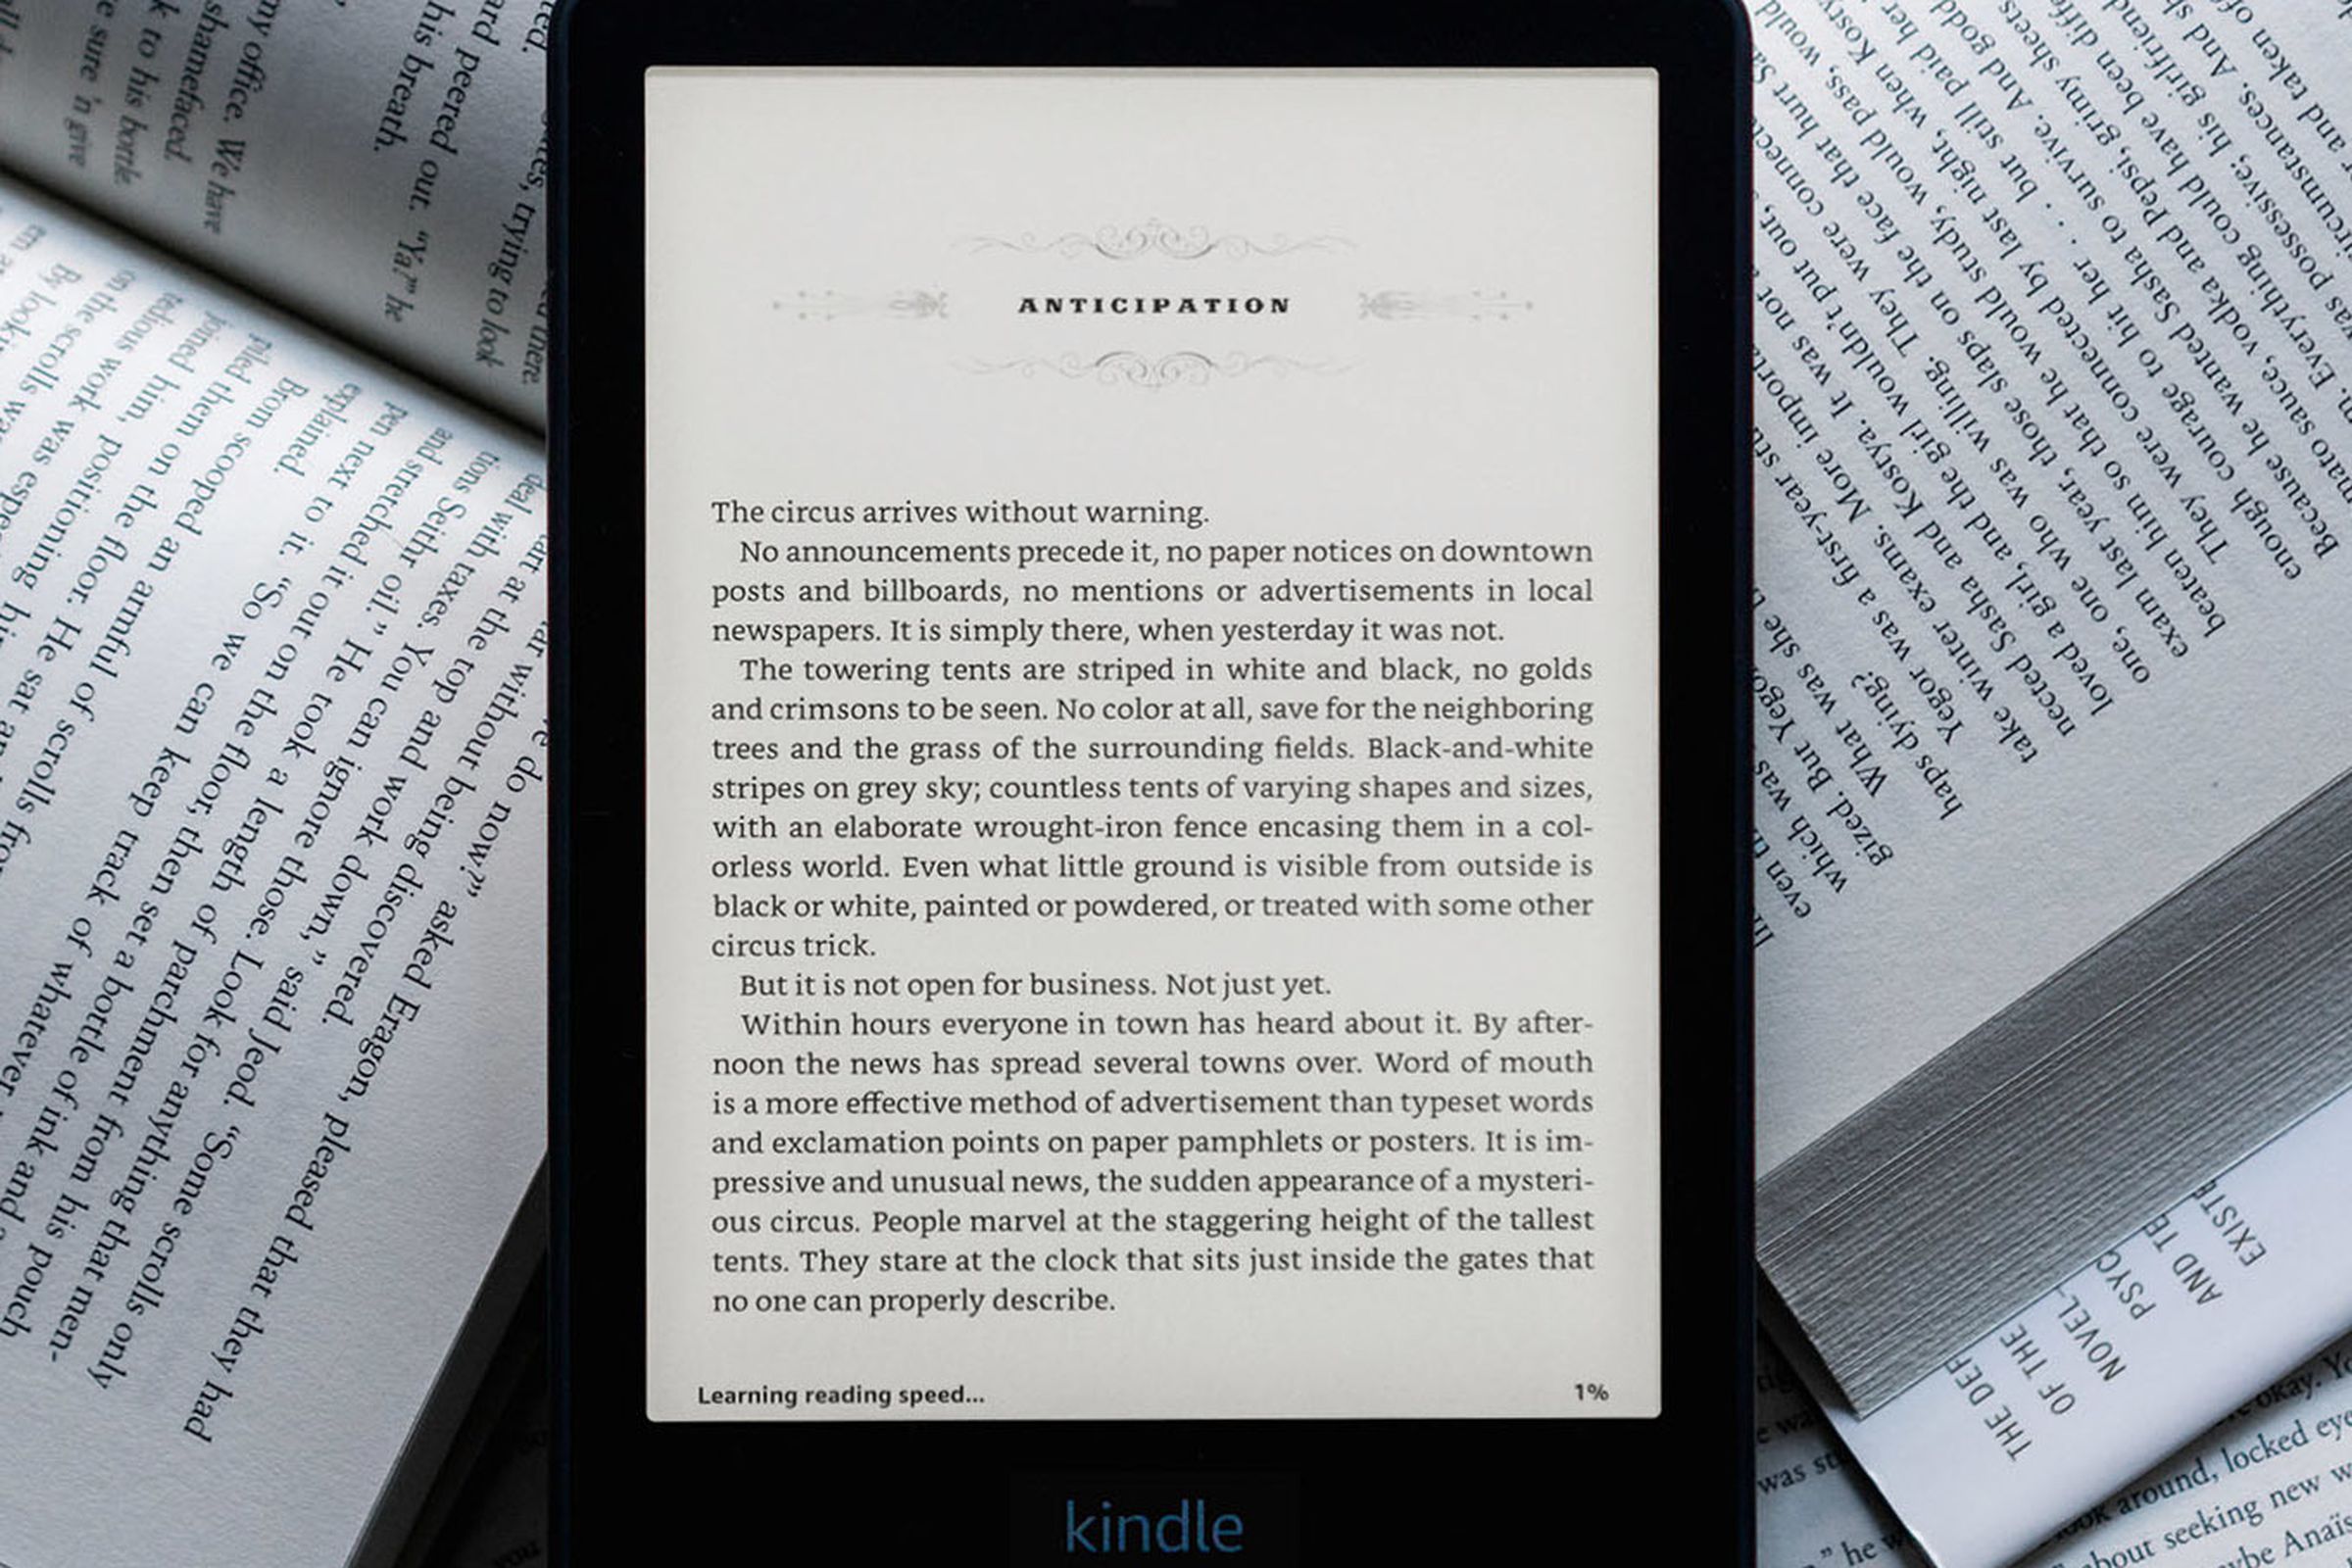 The Kindle Paperwhite e-reader turned on resting on a bunch of analog books.